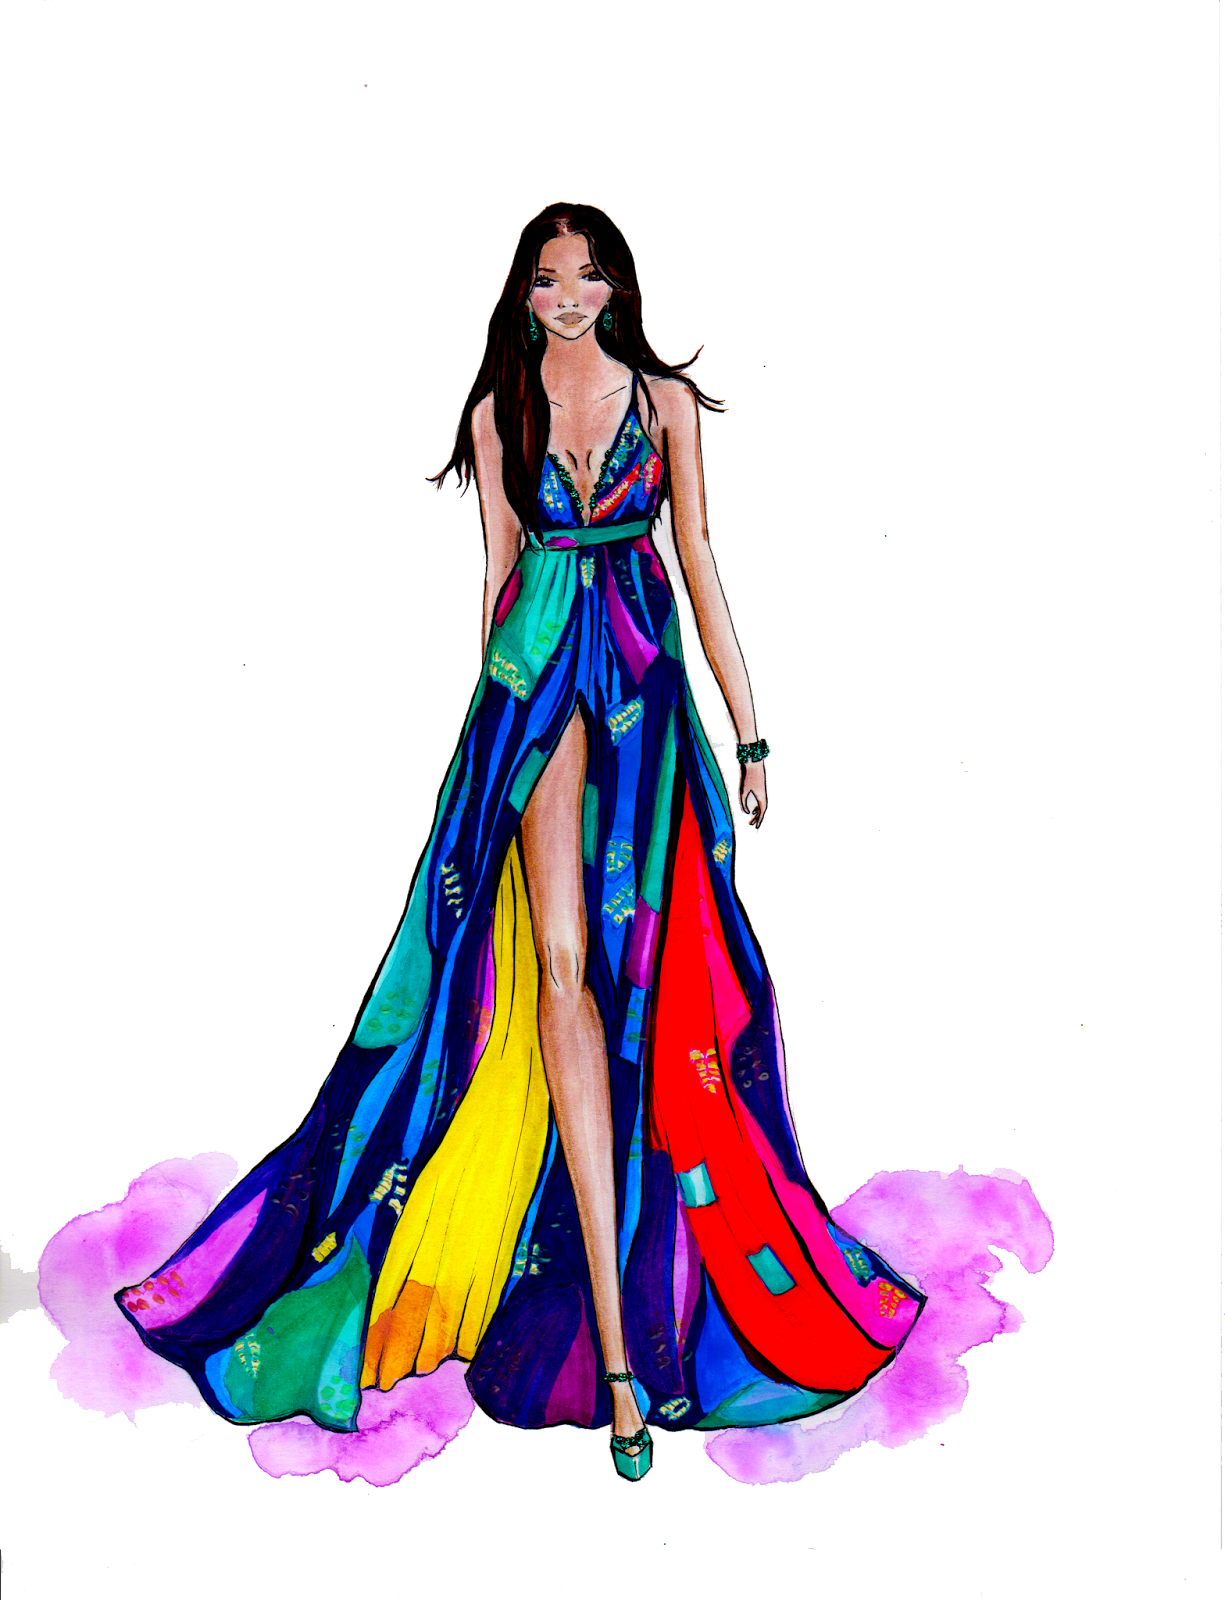 illustrating fashion concept to creation free download